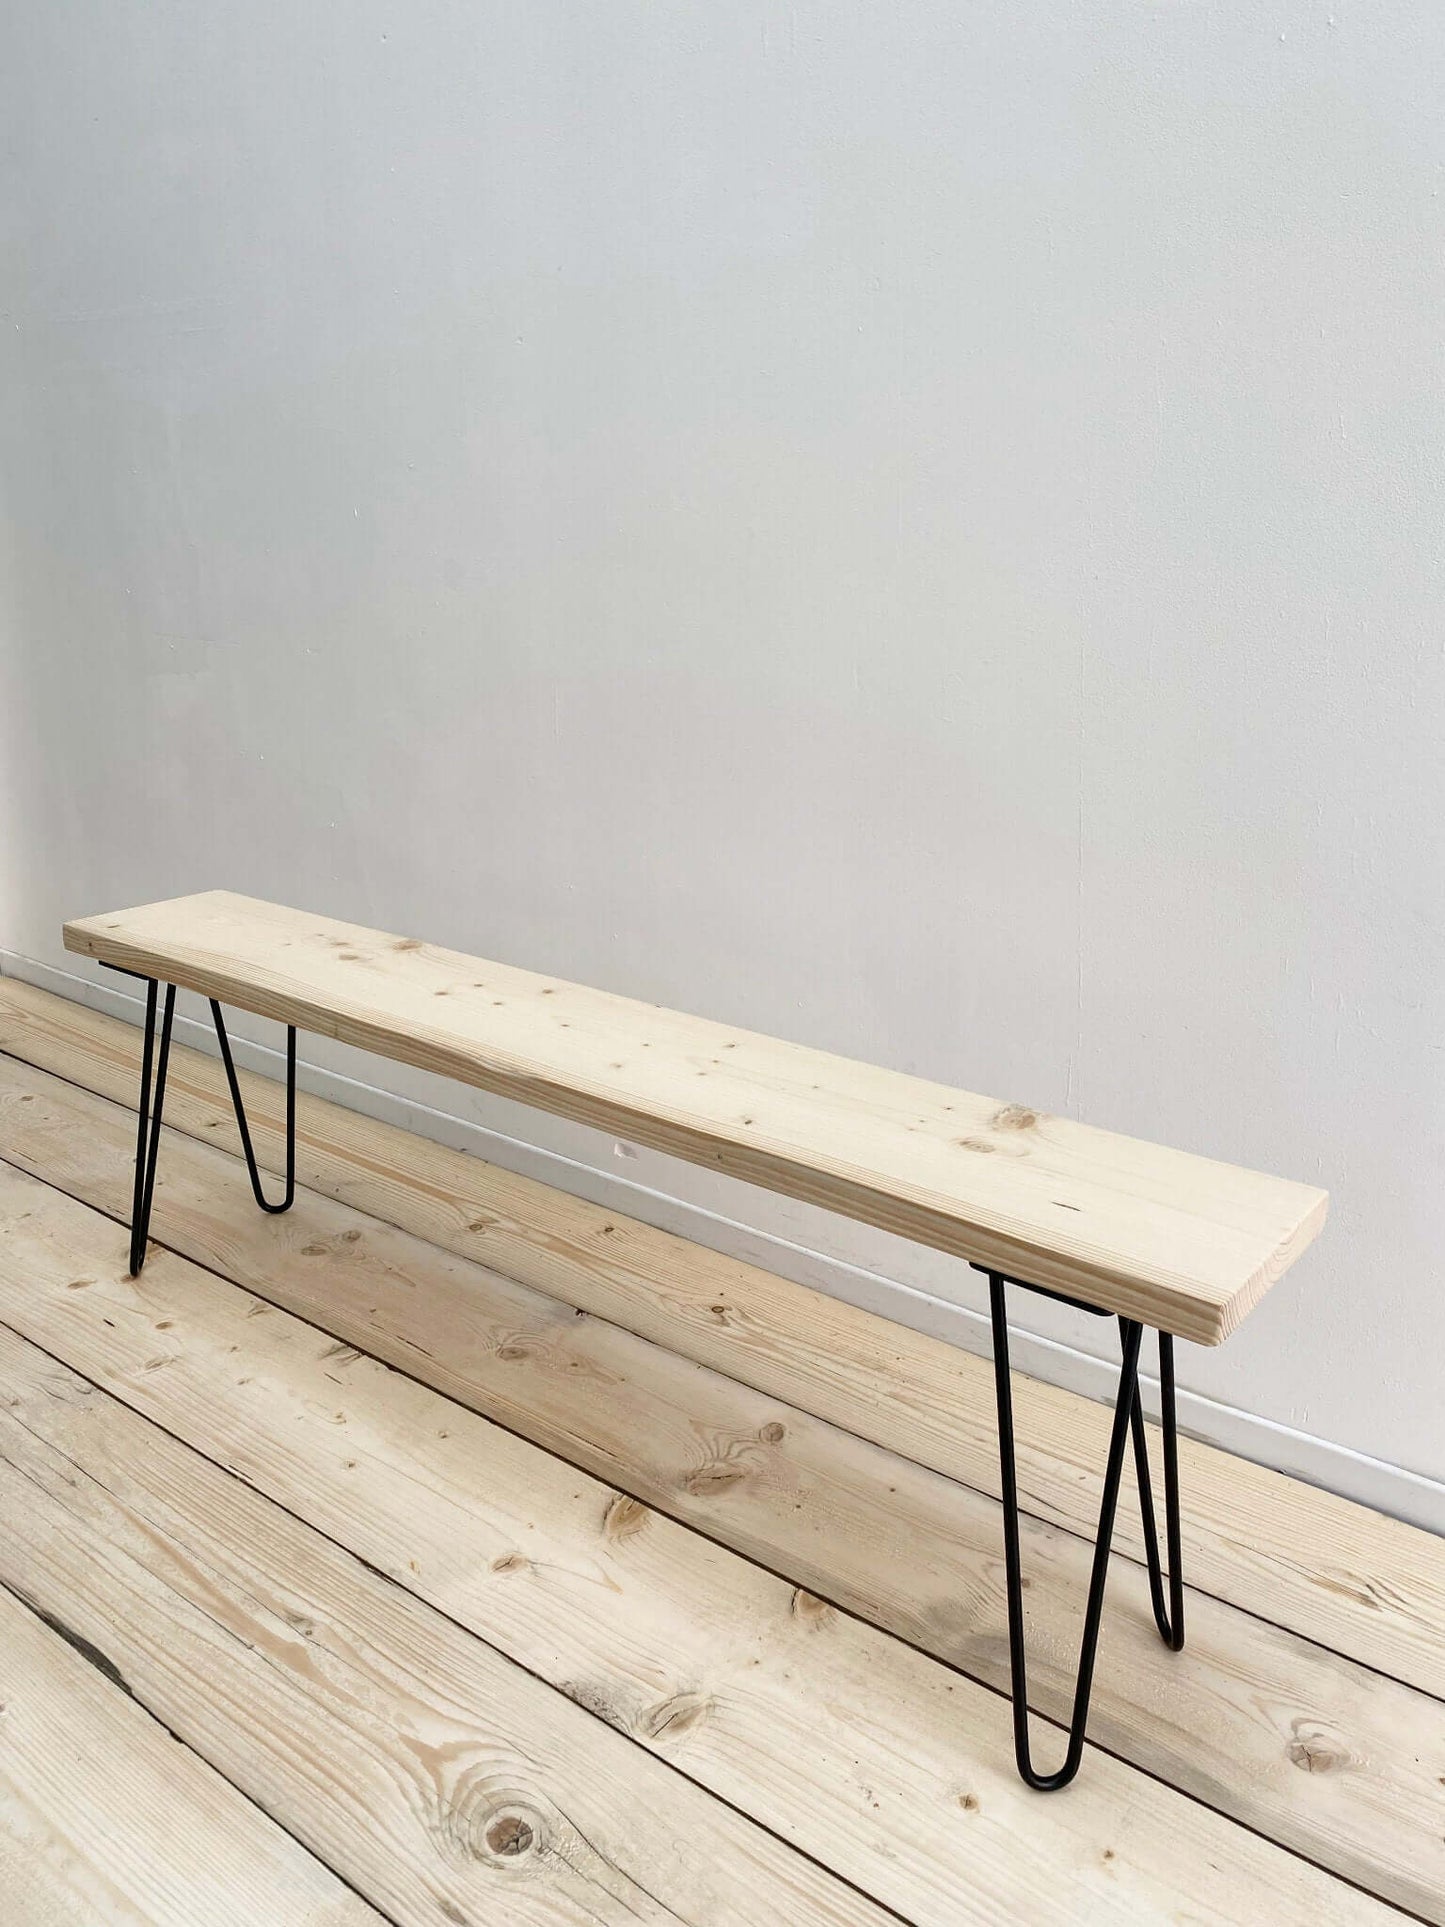 Reclaimed wood bench seat with hairpin legs.